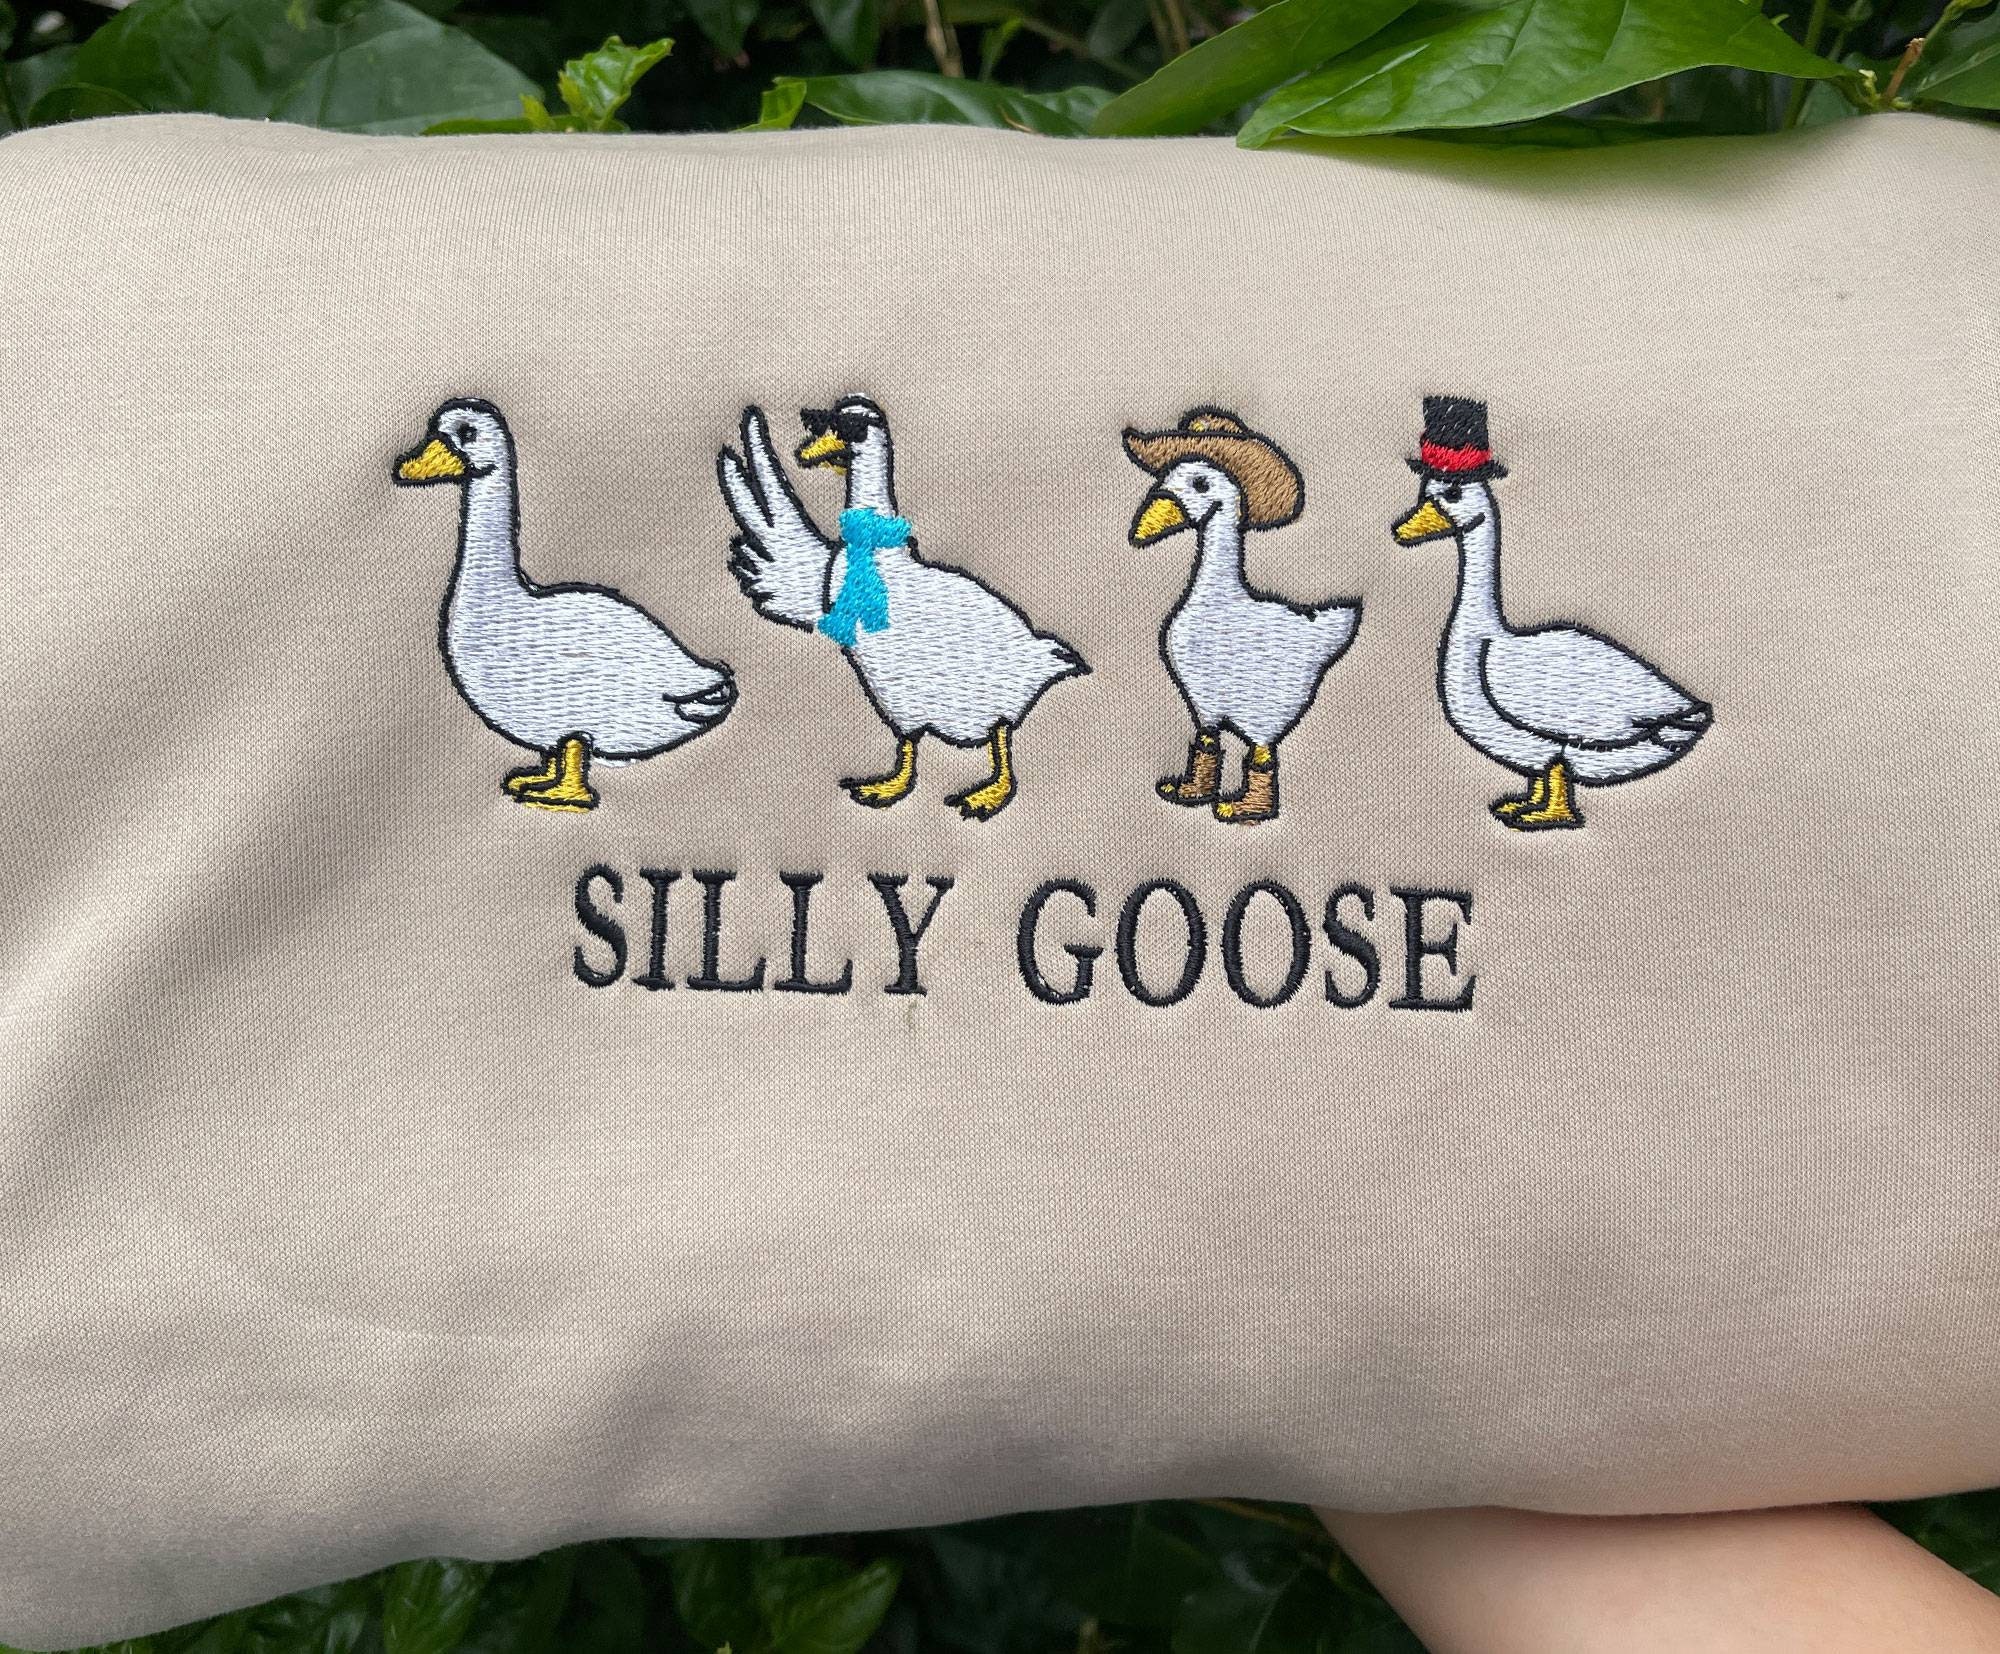 Discover Silly Goose Embroidered Sweatshirt, Silly Goose Crewneck, Funny Shirt, Goose Shirt, Silly Sweatshirt EH063